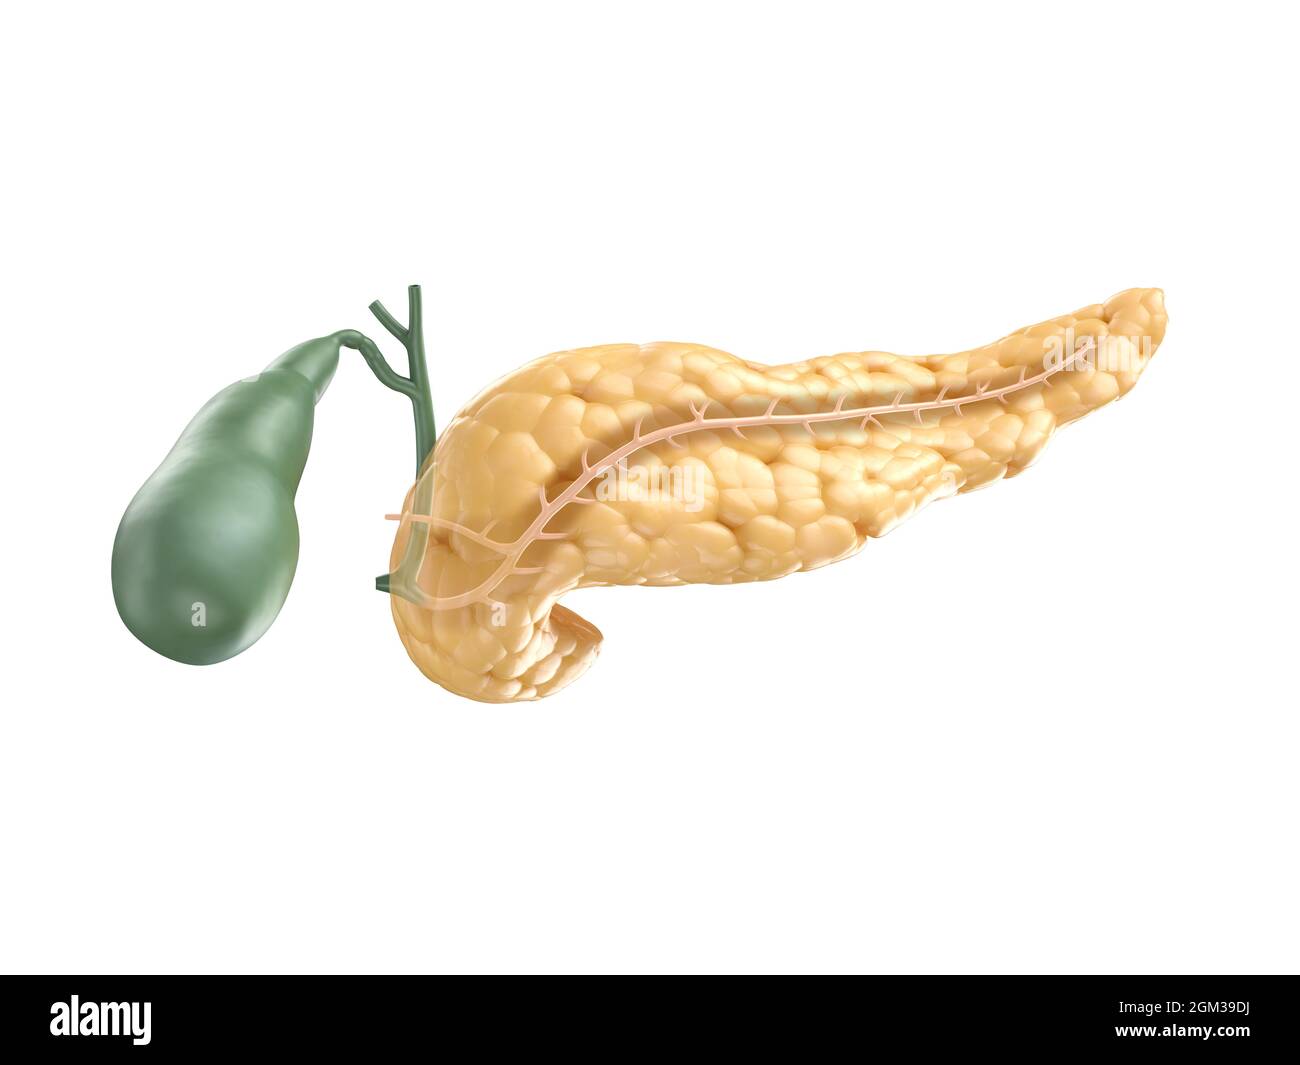 Anatomically accurate illustration of human pancreas with gallbladder. Cut section of pancreas with visible pancreatic duct. 3d rendering Stock Photo